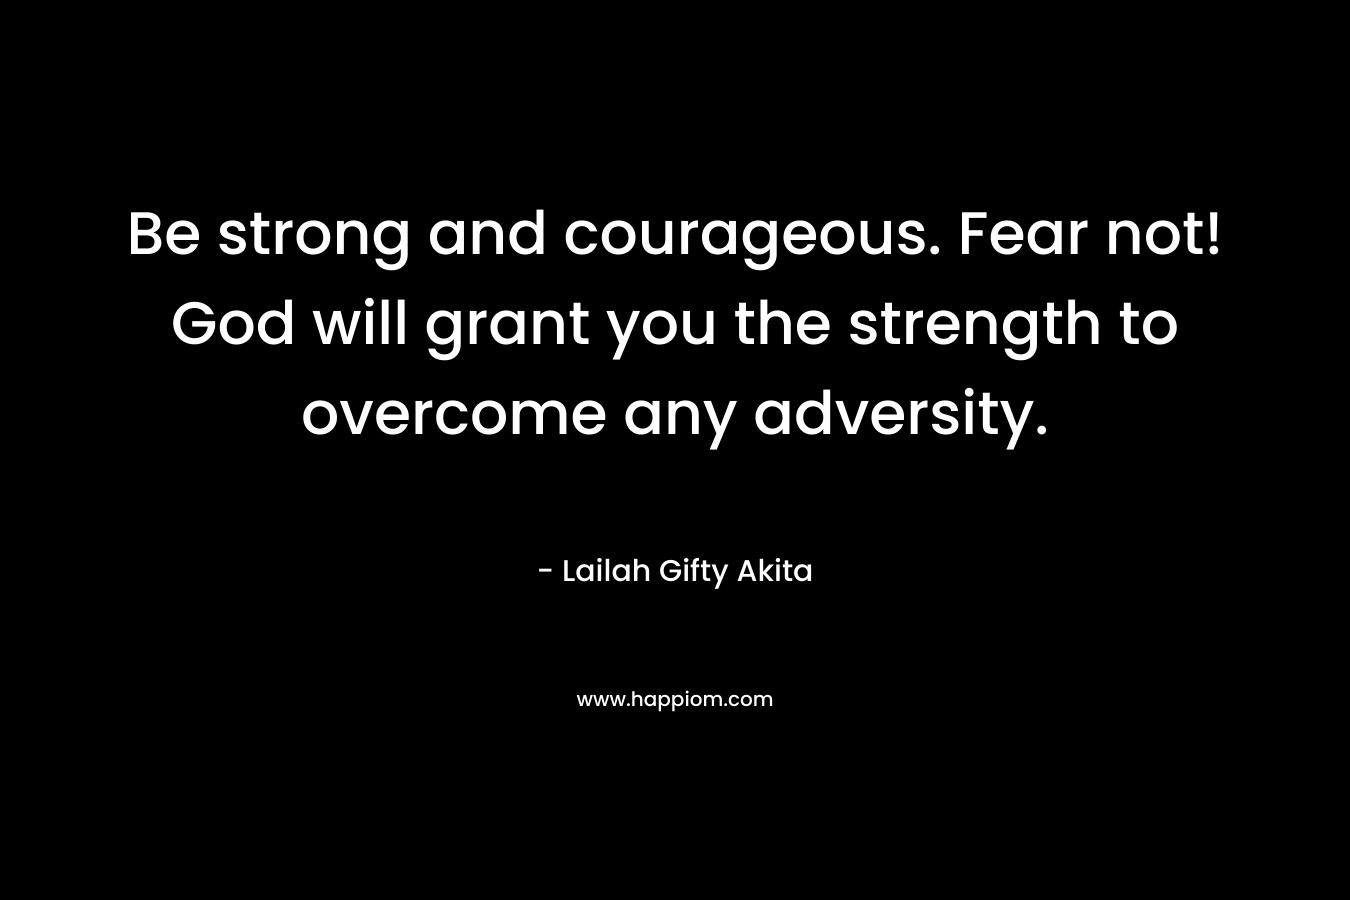 Be strong and courageous. Fear not! God will grant you the strength to overcome any adversity.